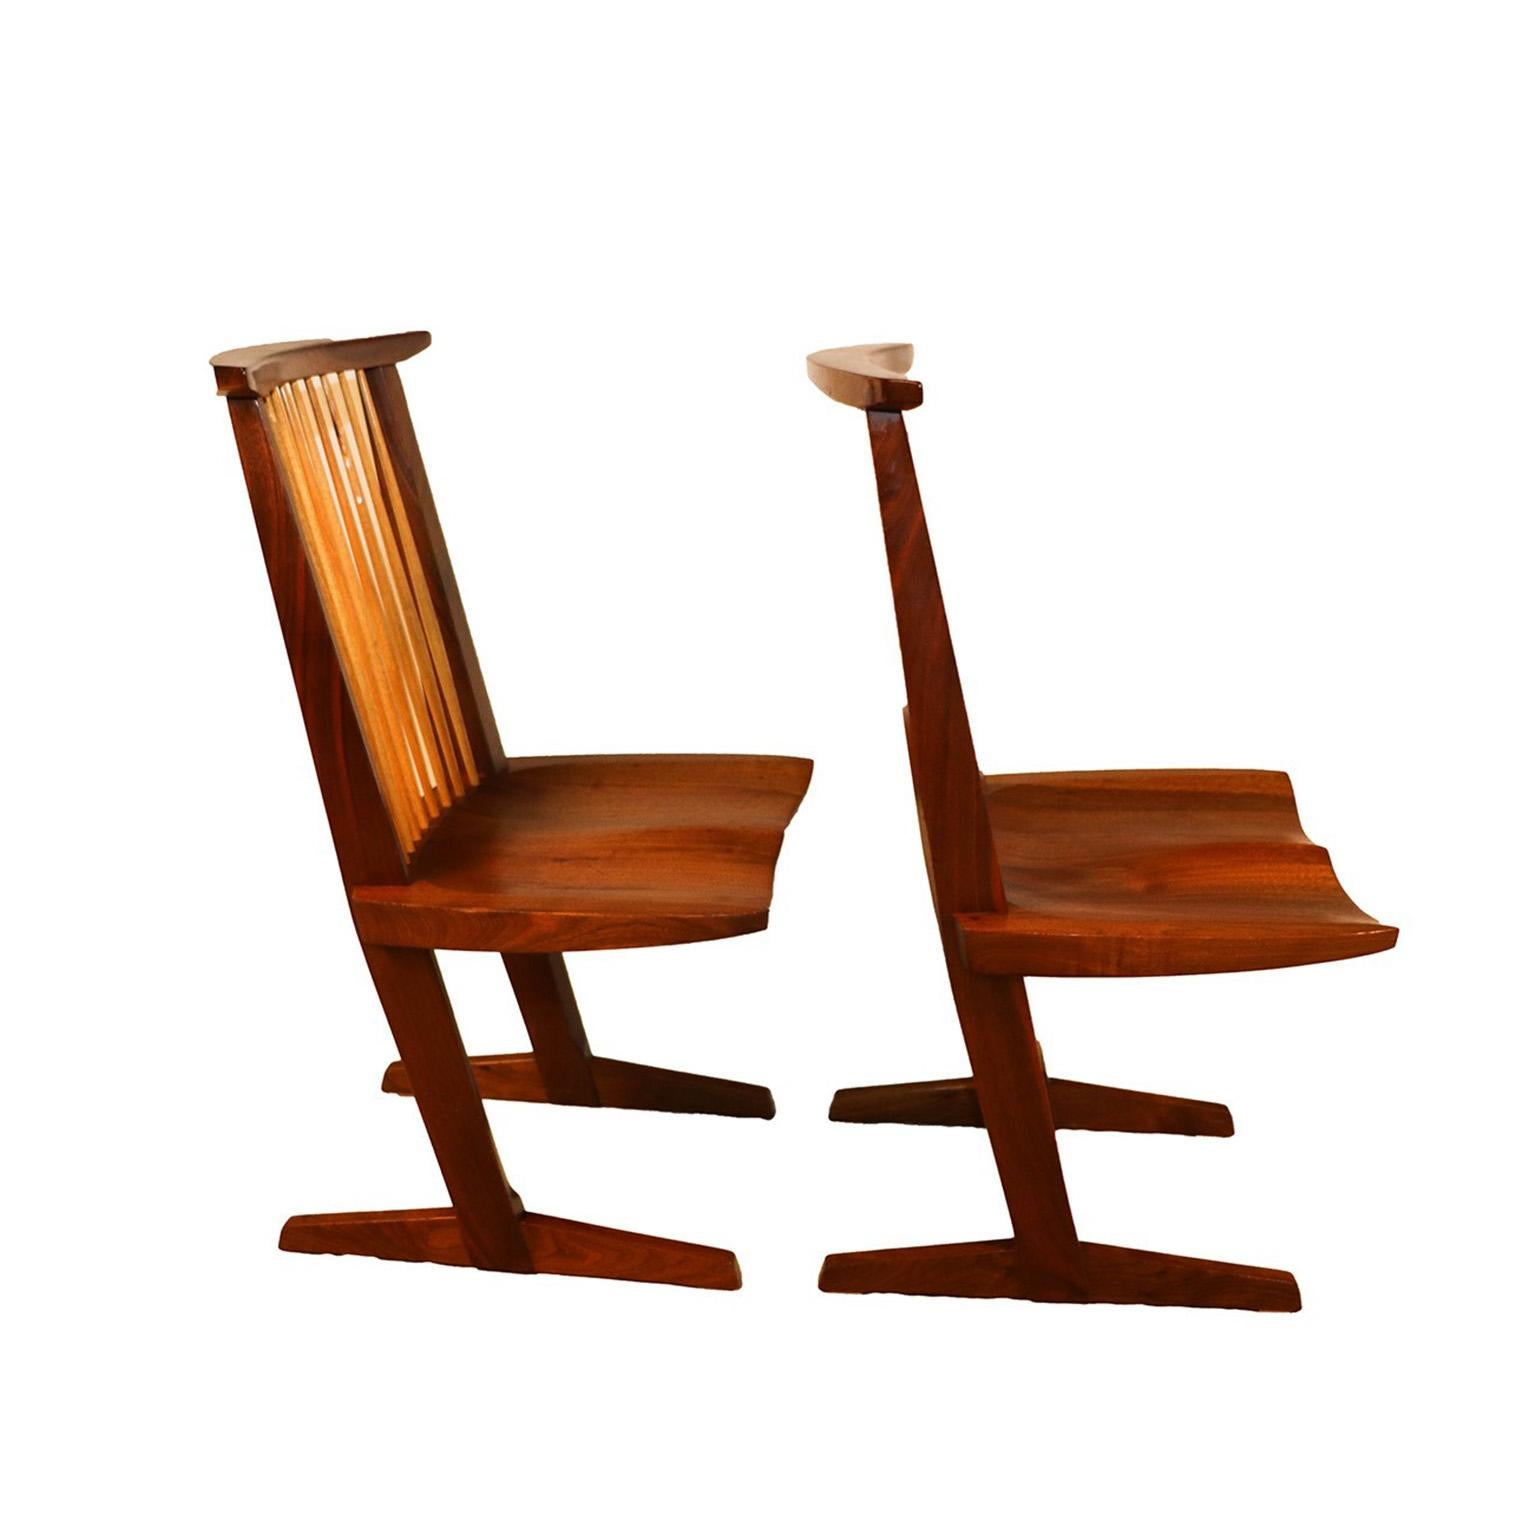 Designed by George Nakashima in 1985. This gorgeous pair of clean and solid sculptural chairs have been well cared for over the years, in original condition. Features walnut and hickory spindled backs, flat curved crest rails, a beautiful selection